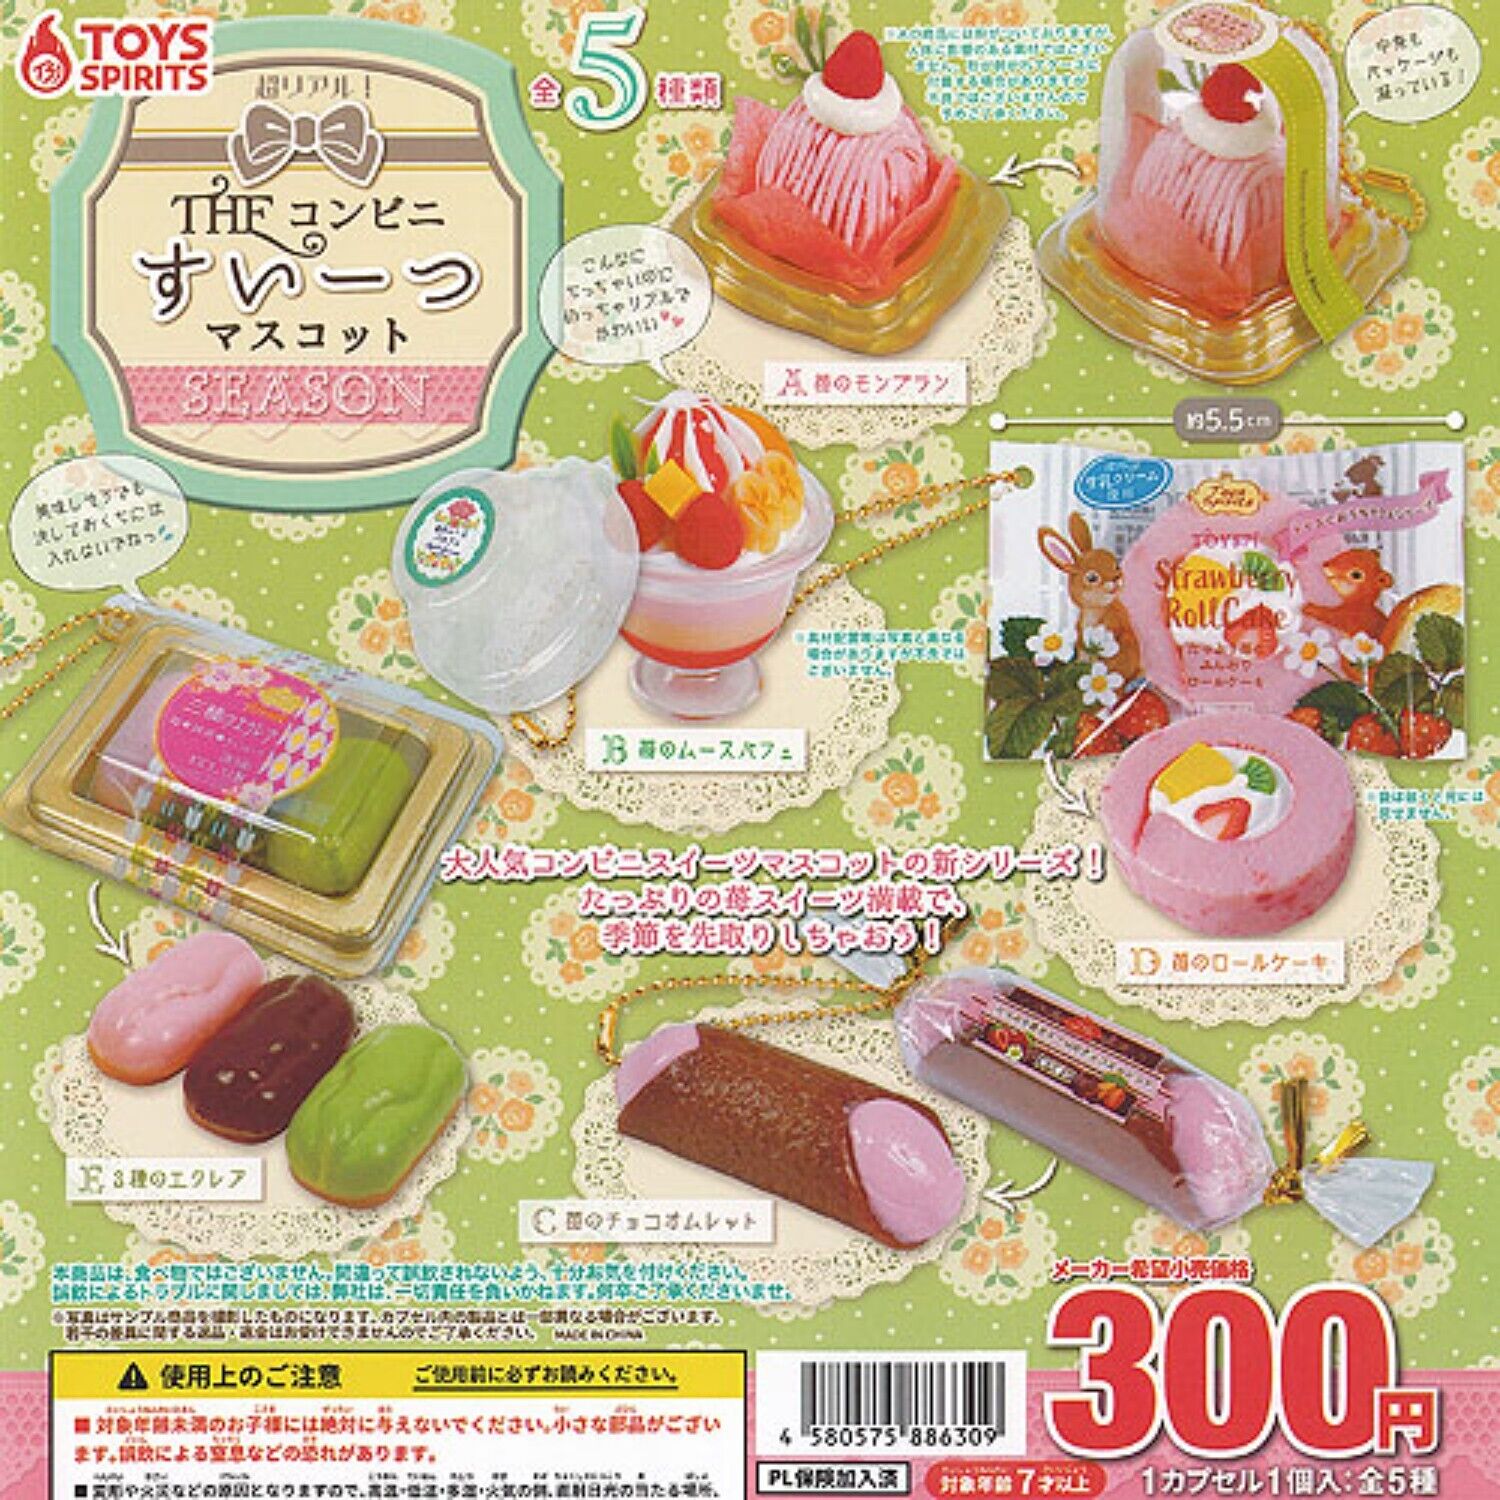 THE convenience store sweets Mascot Capsule Toy 5 Types Full Comp Set Gacha New